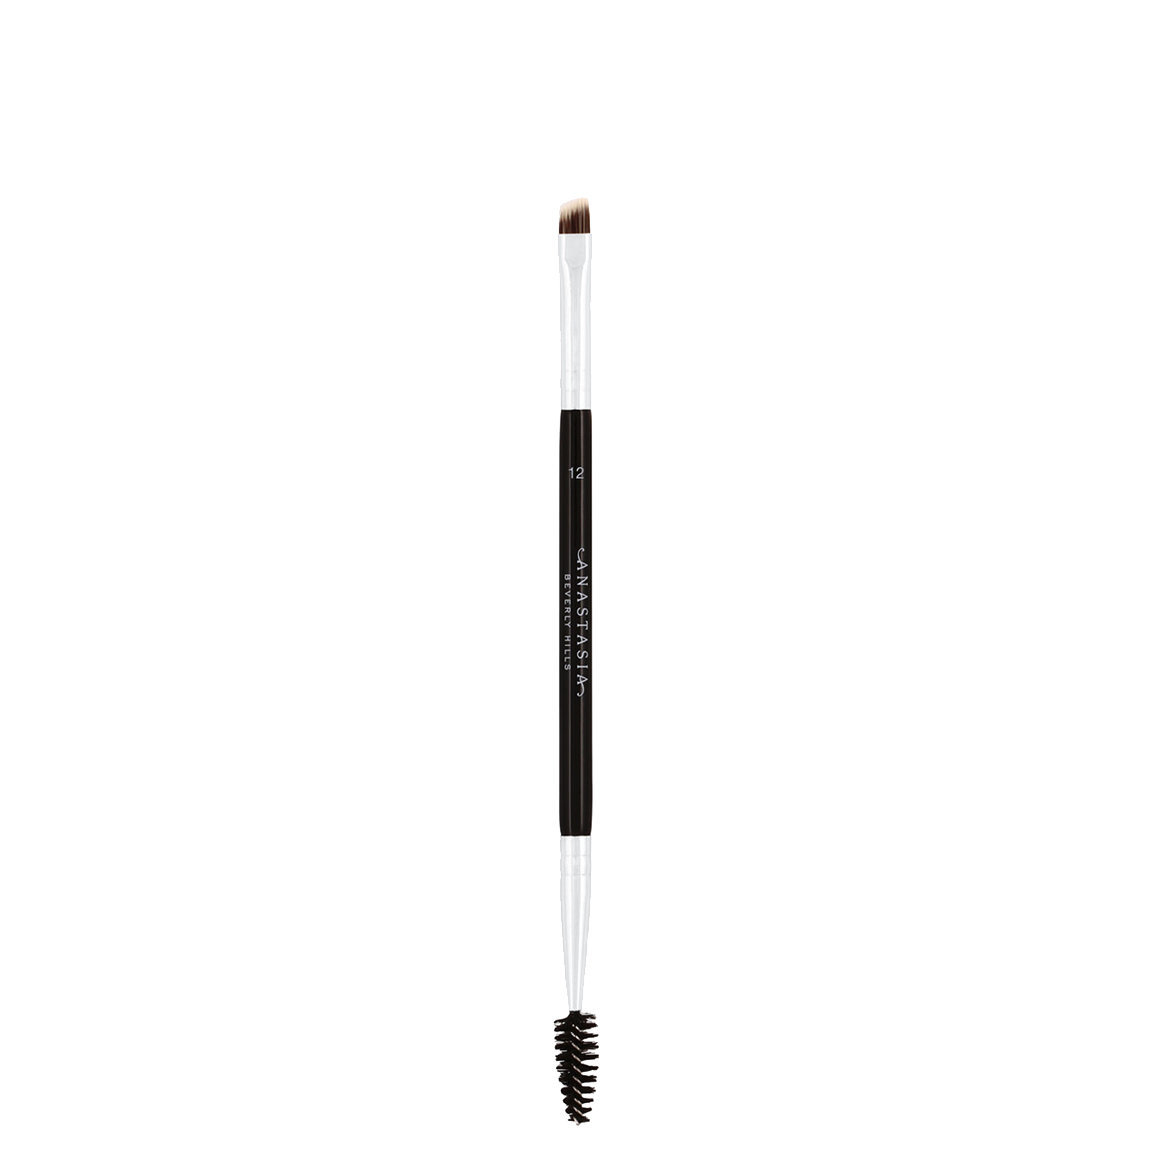 Anastasia Beverly Hills Brush 12 Dual-Ended Firm Angled brush alternative view 1 - product swatch.